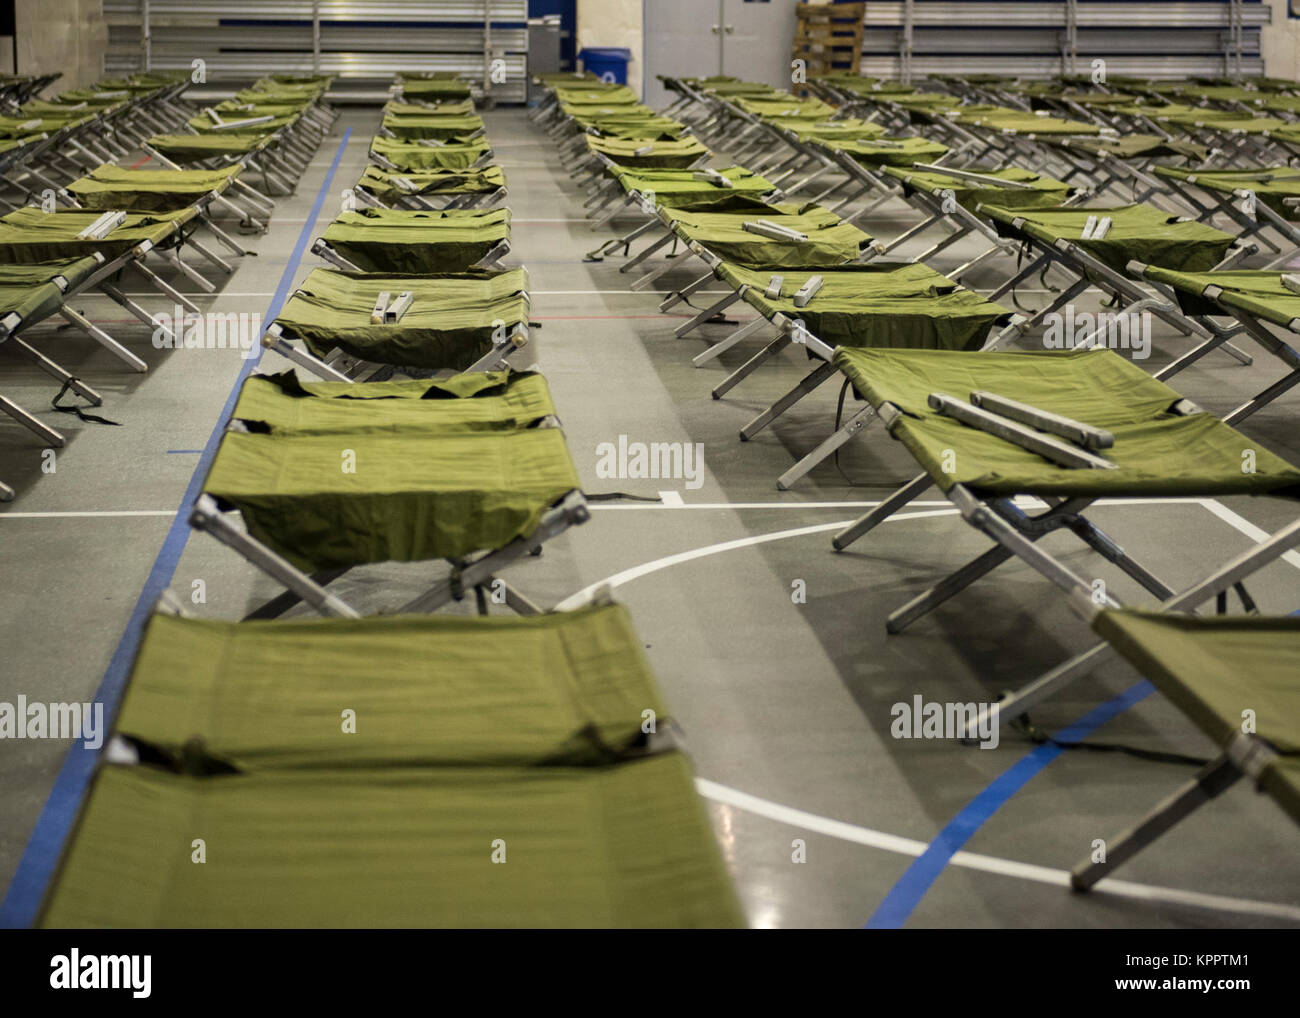 Rows of cots await non-combatants as part of a deployment and ...